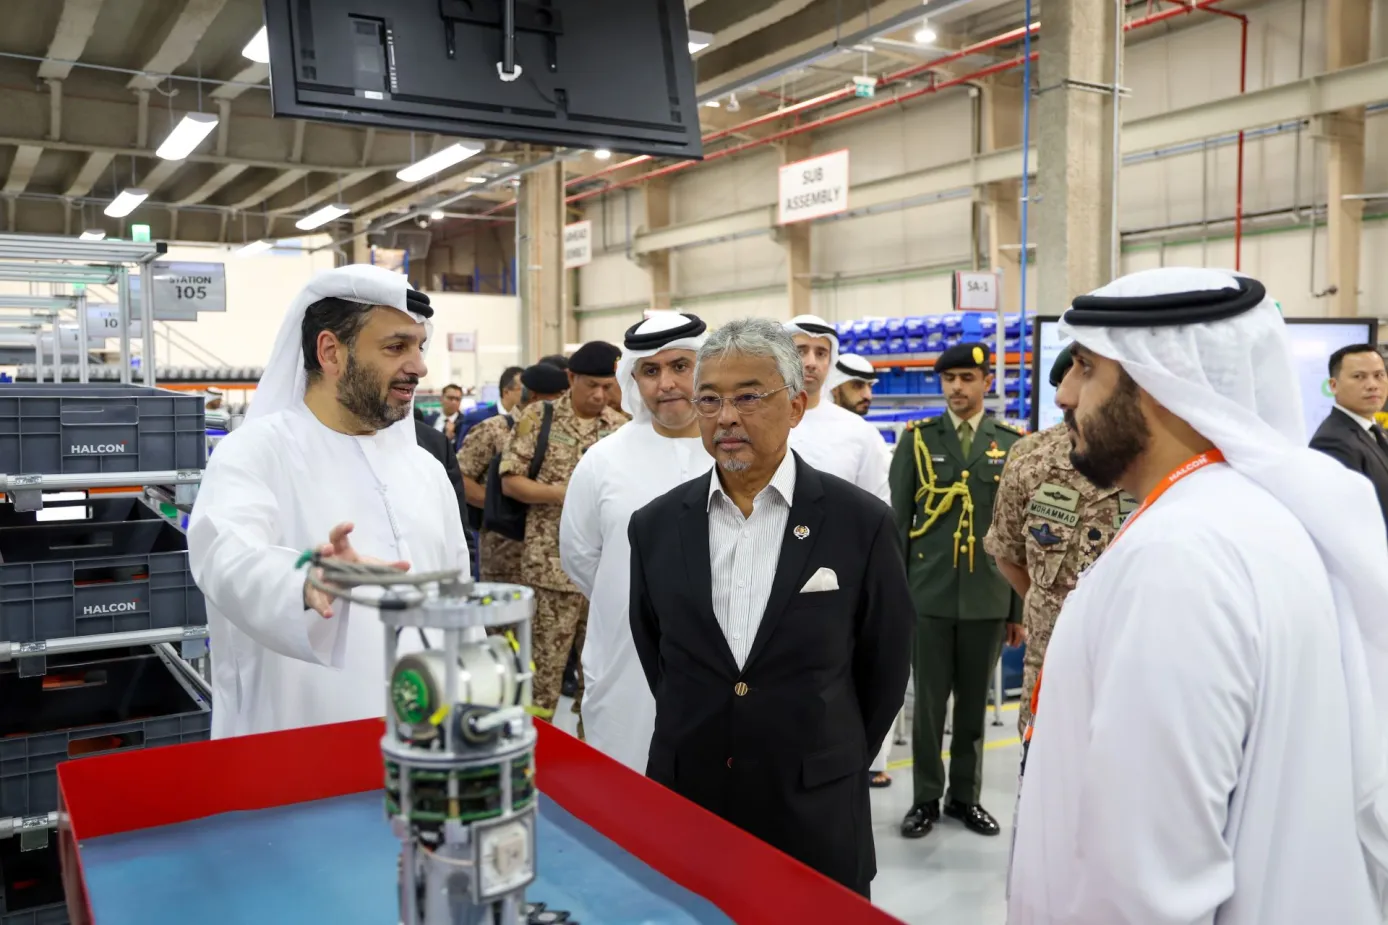 EDGE Group Welcomes His Majesty the King of Malaysia at its Advanced Manufacturing Facilities